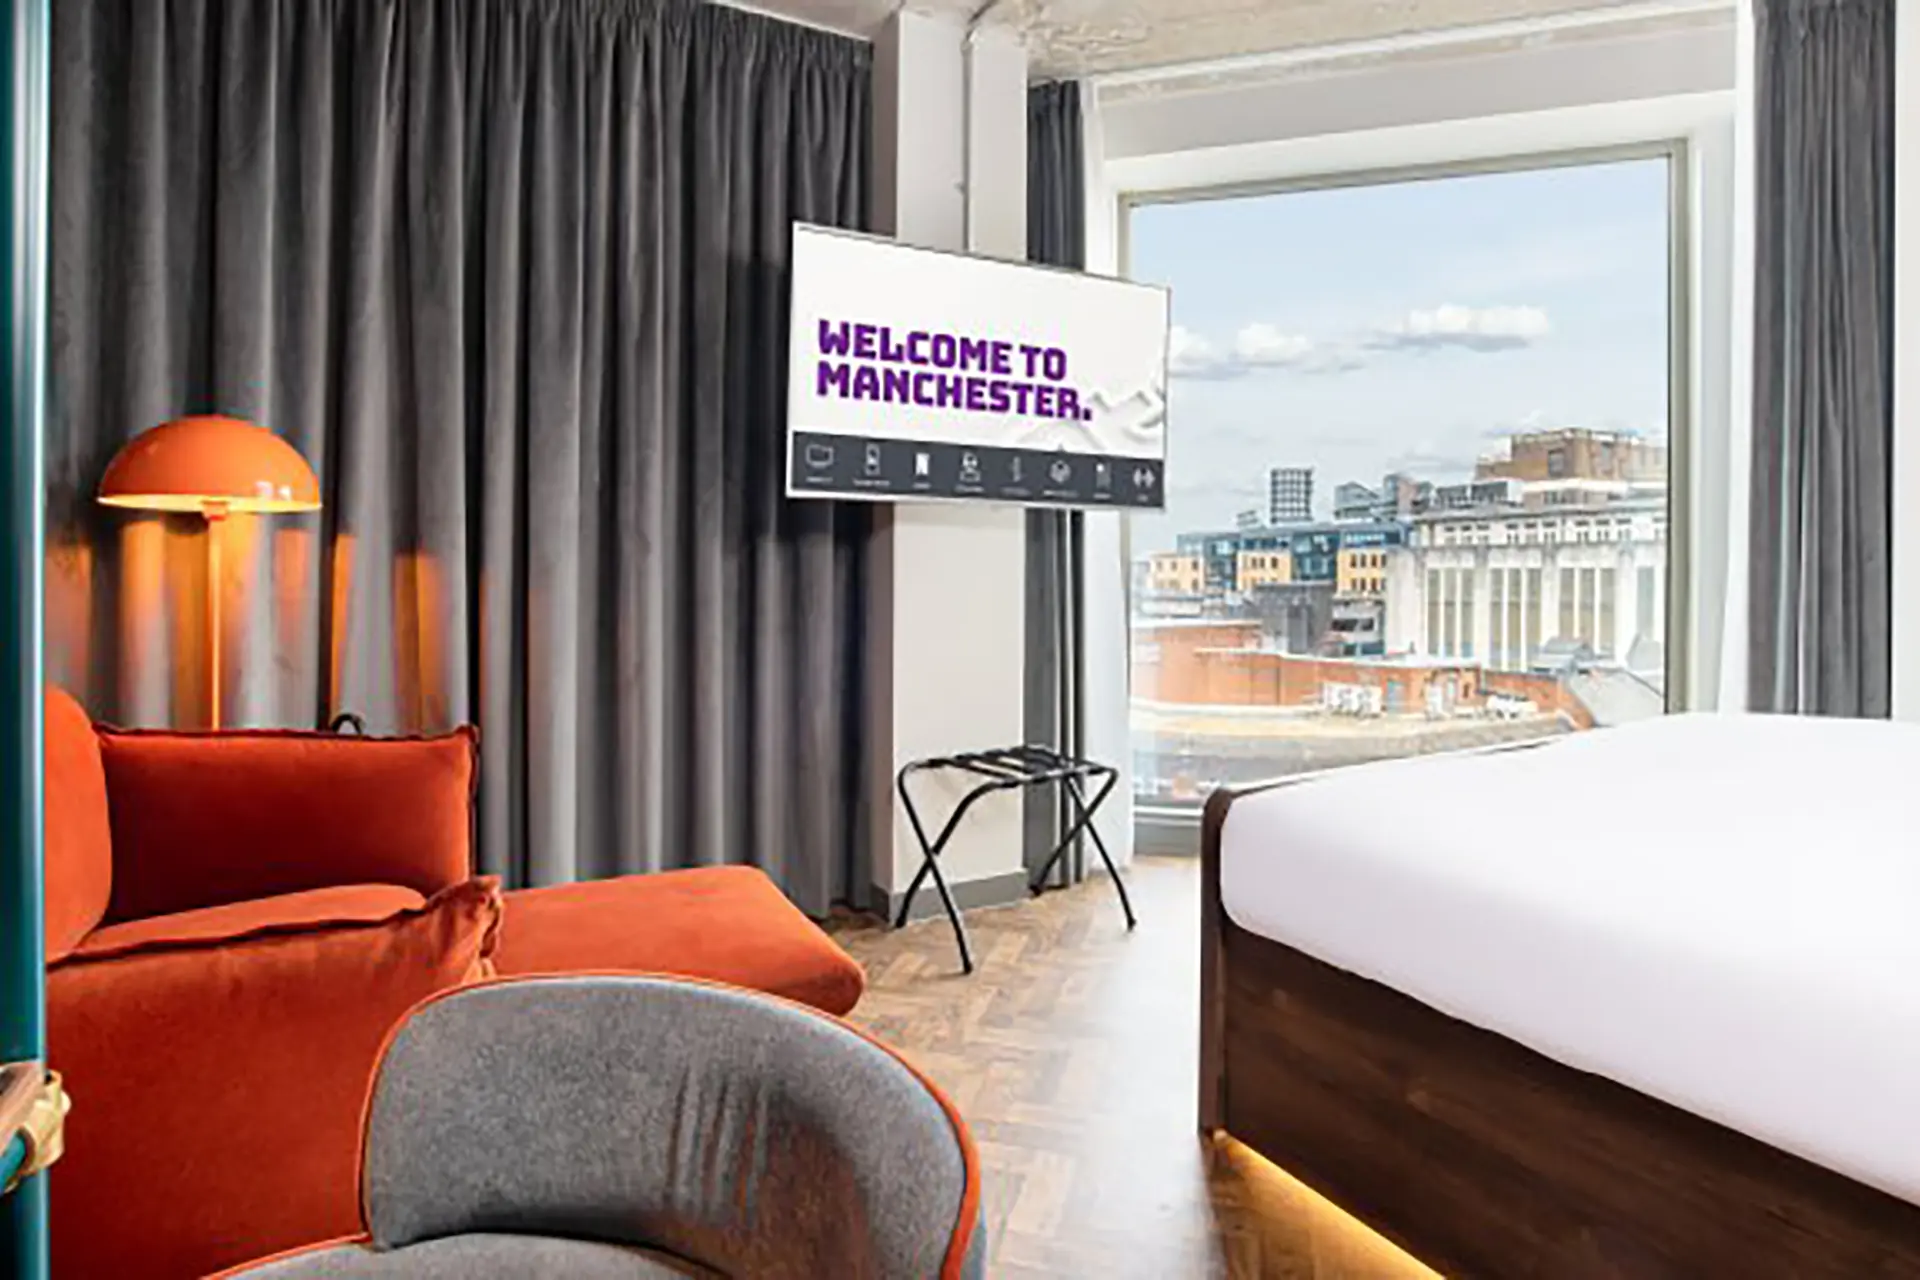 Yotel Manchester suite